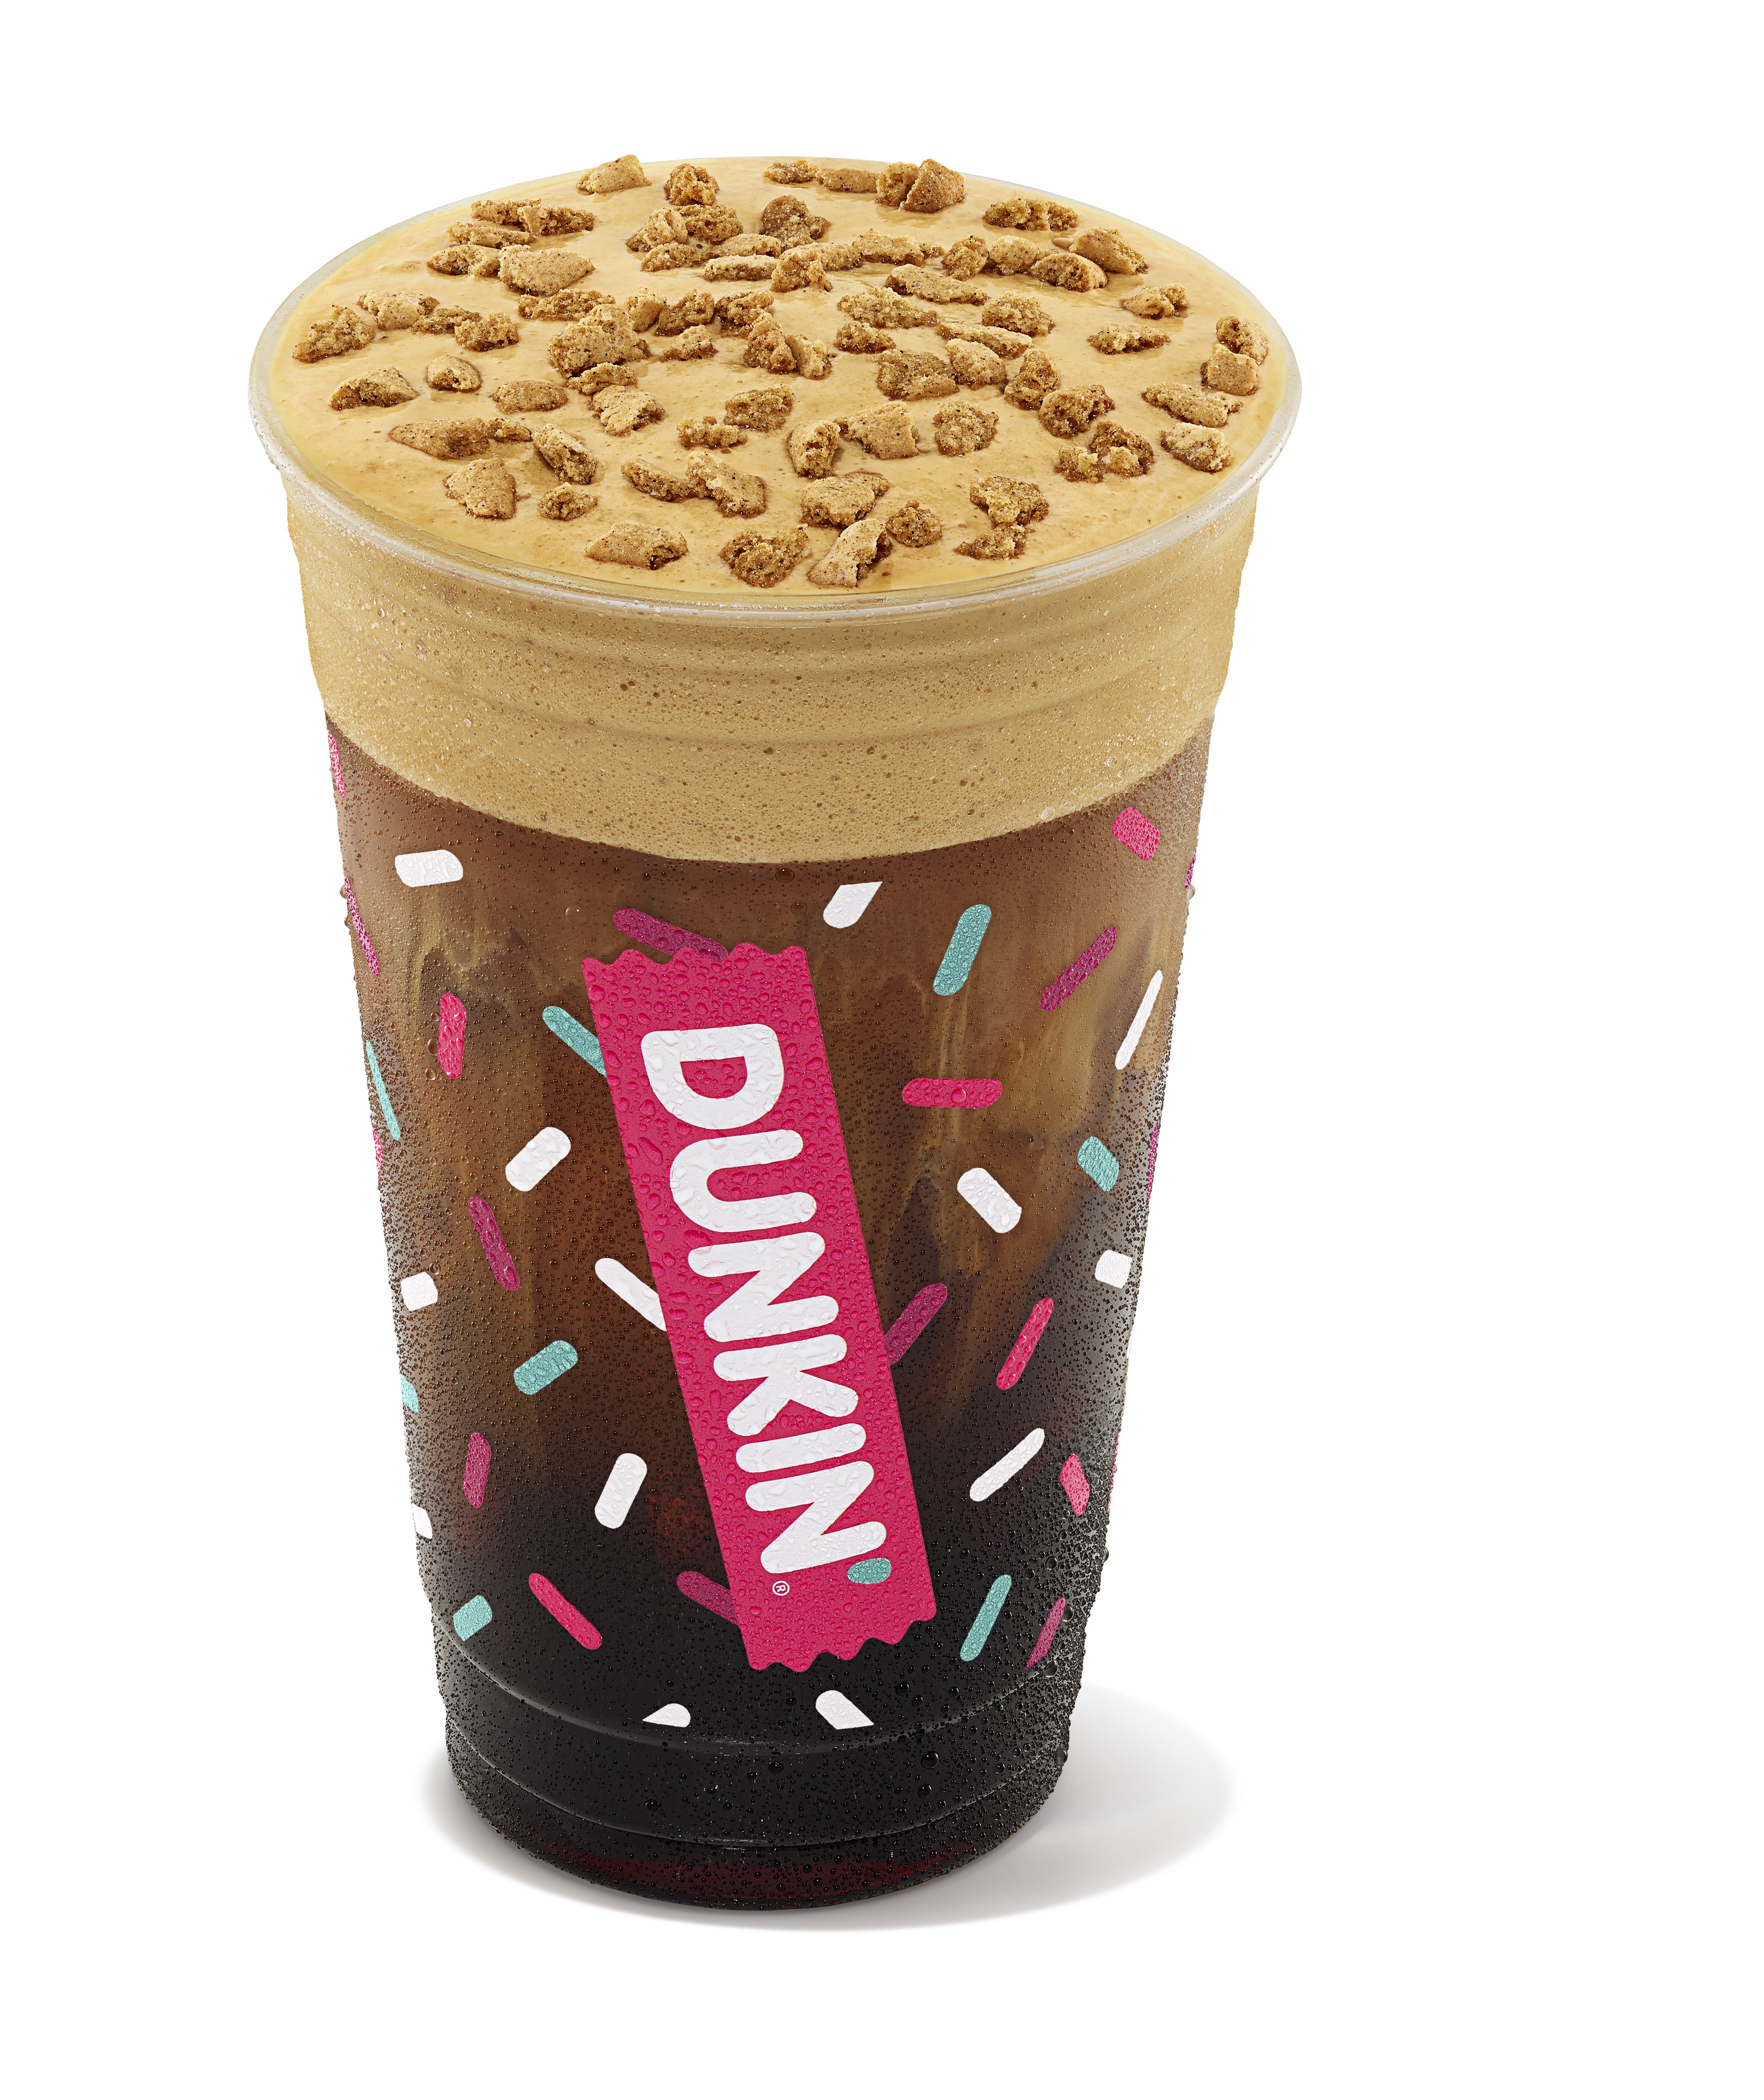 Dunkin' releases Valentine's Day cups & TikTok is in love with